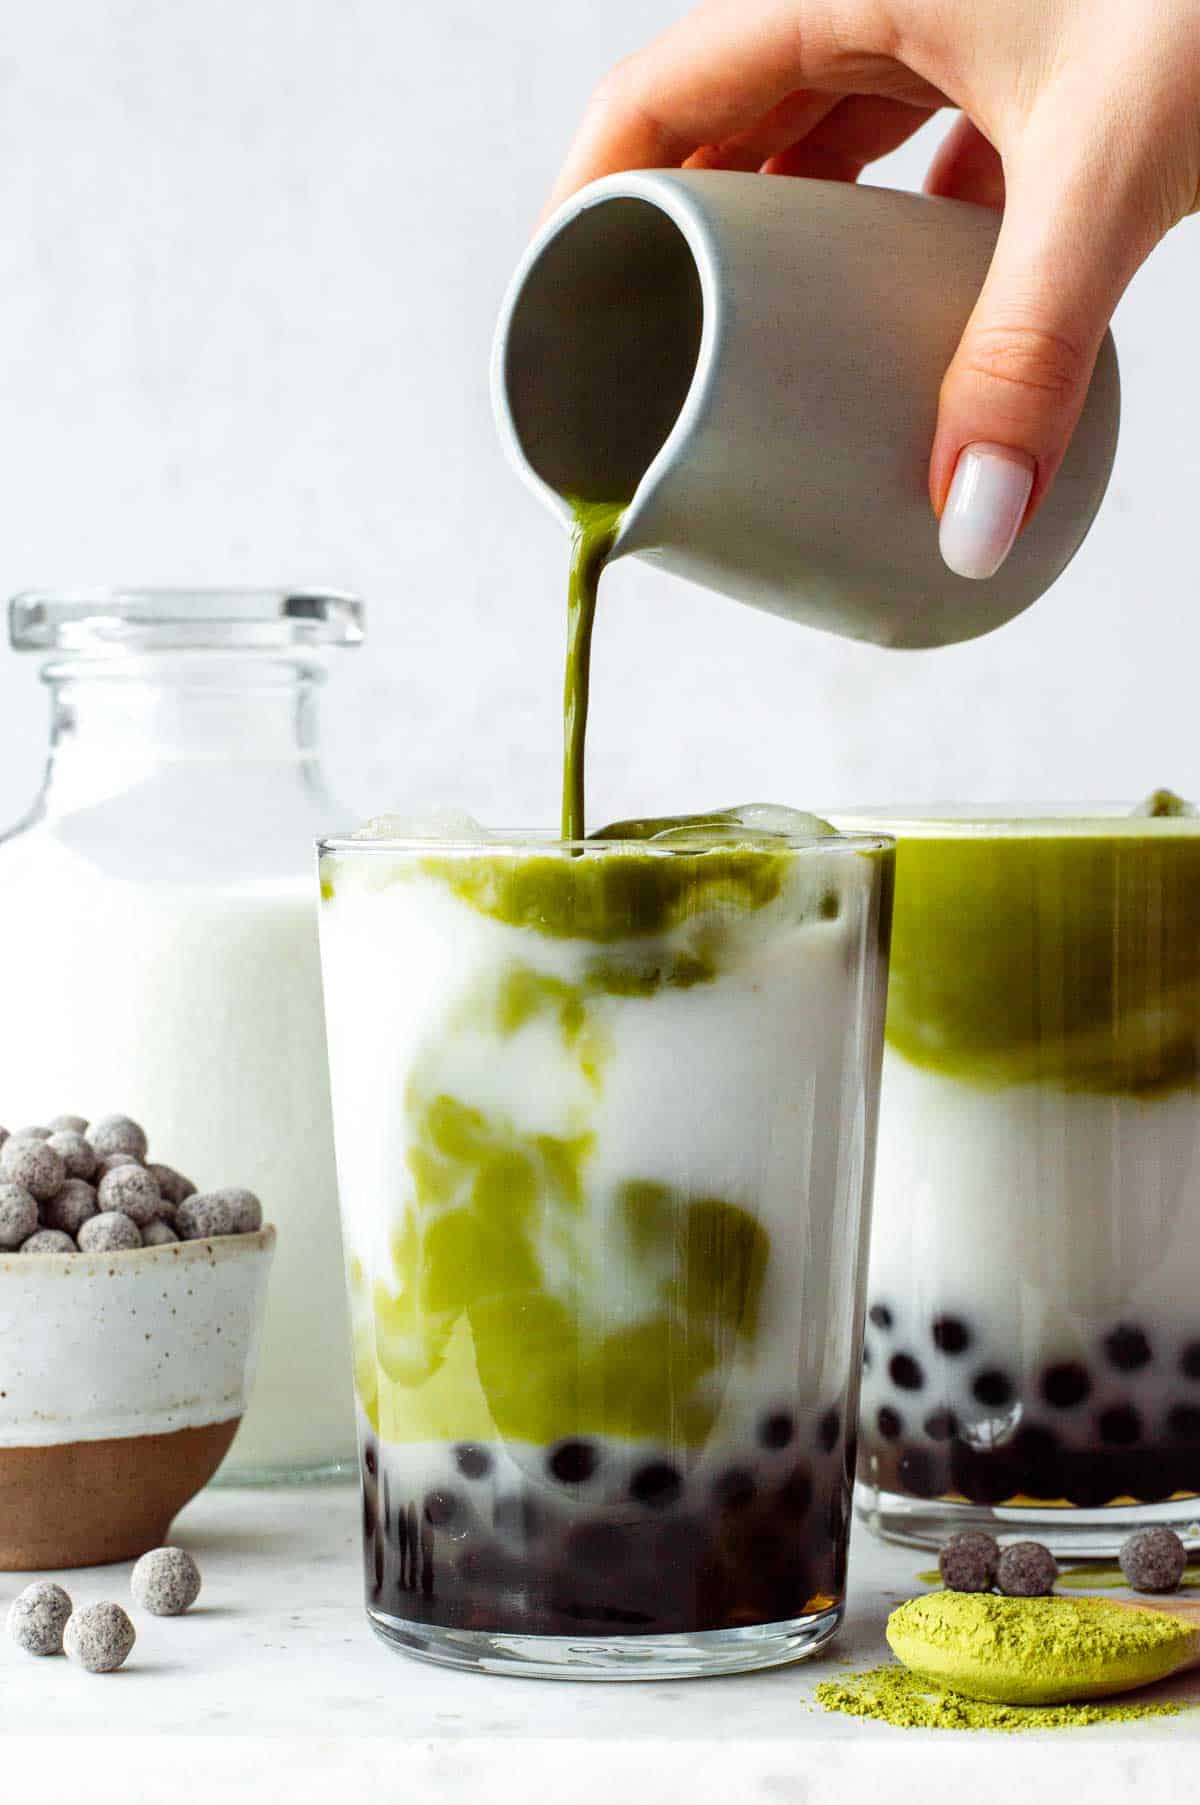 Pouring the matcha-milk mixture over the boba pearls in a glass.